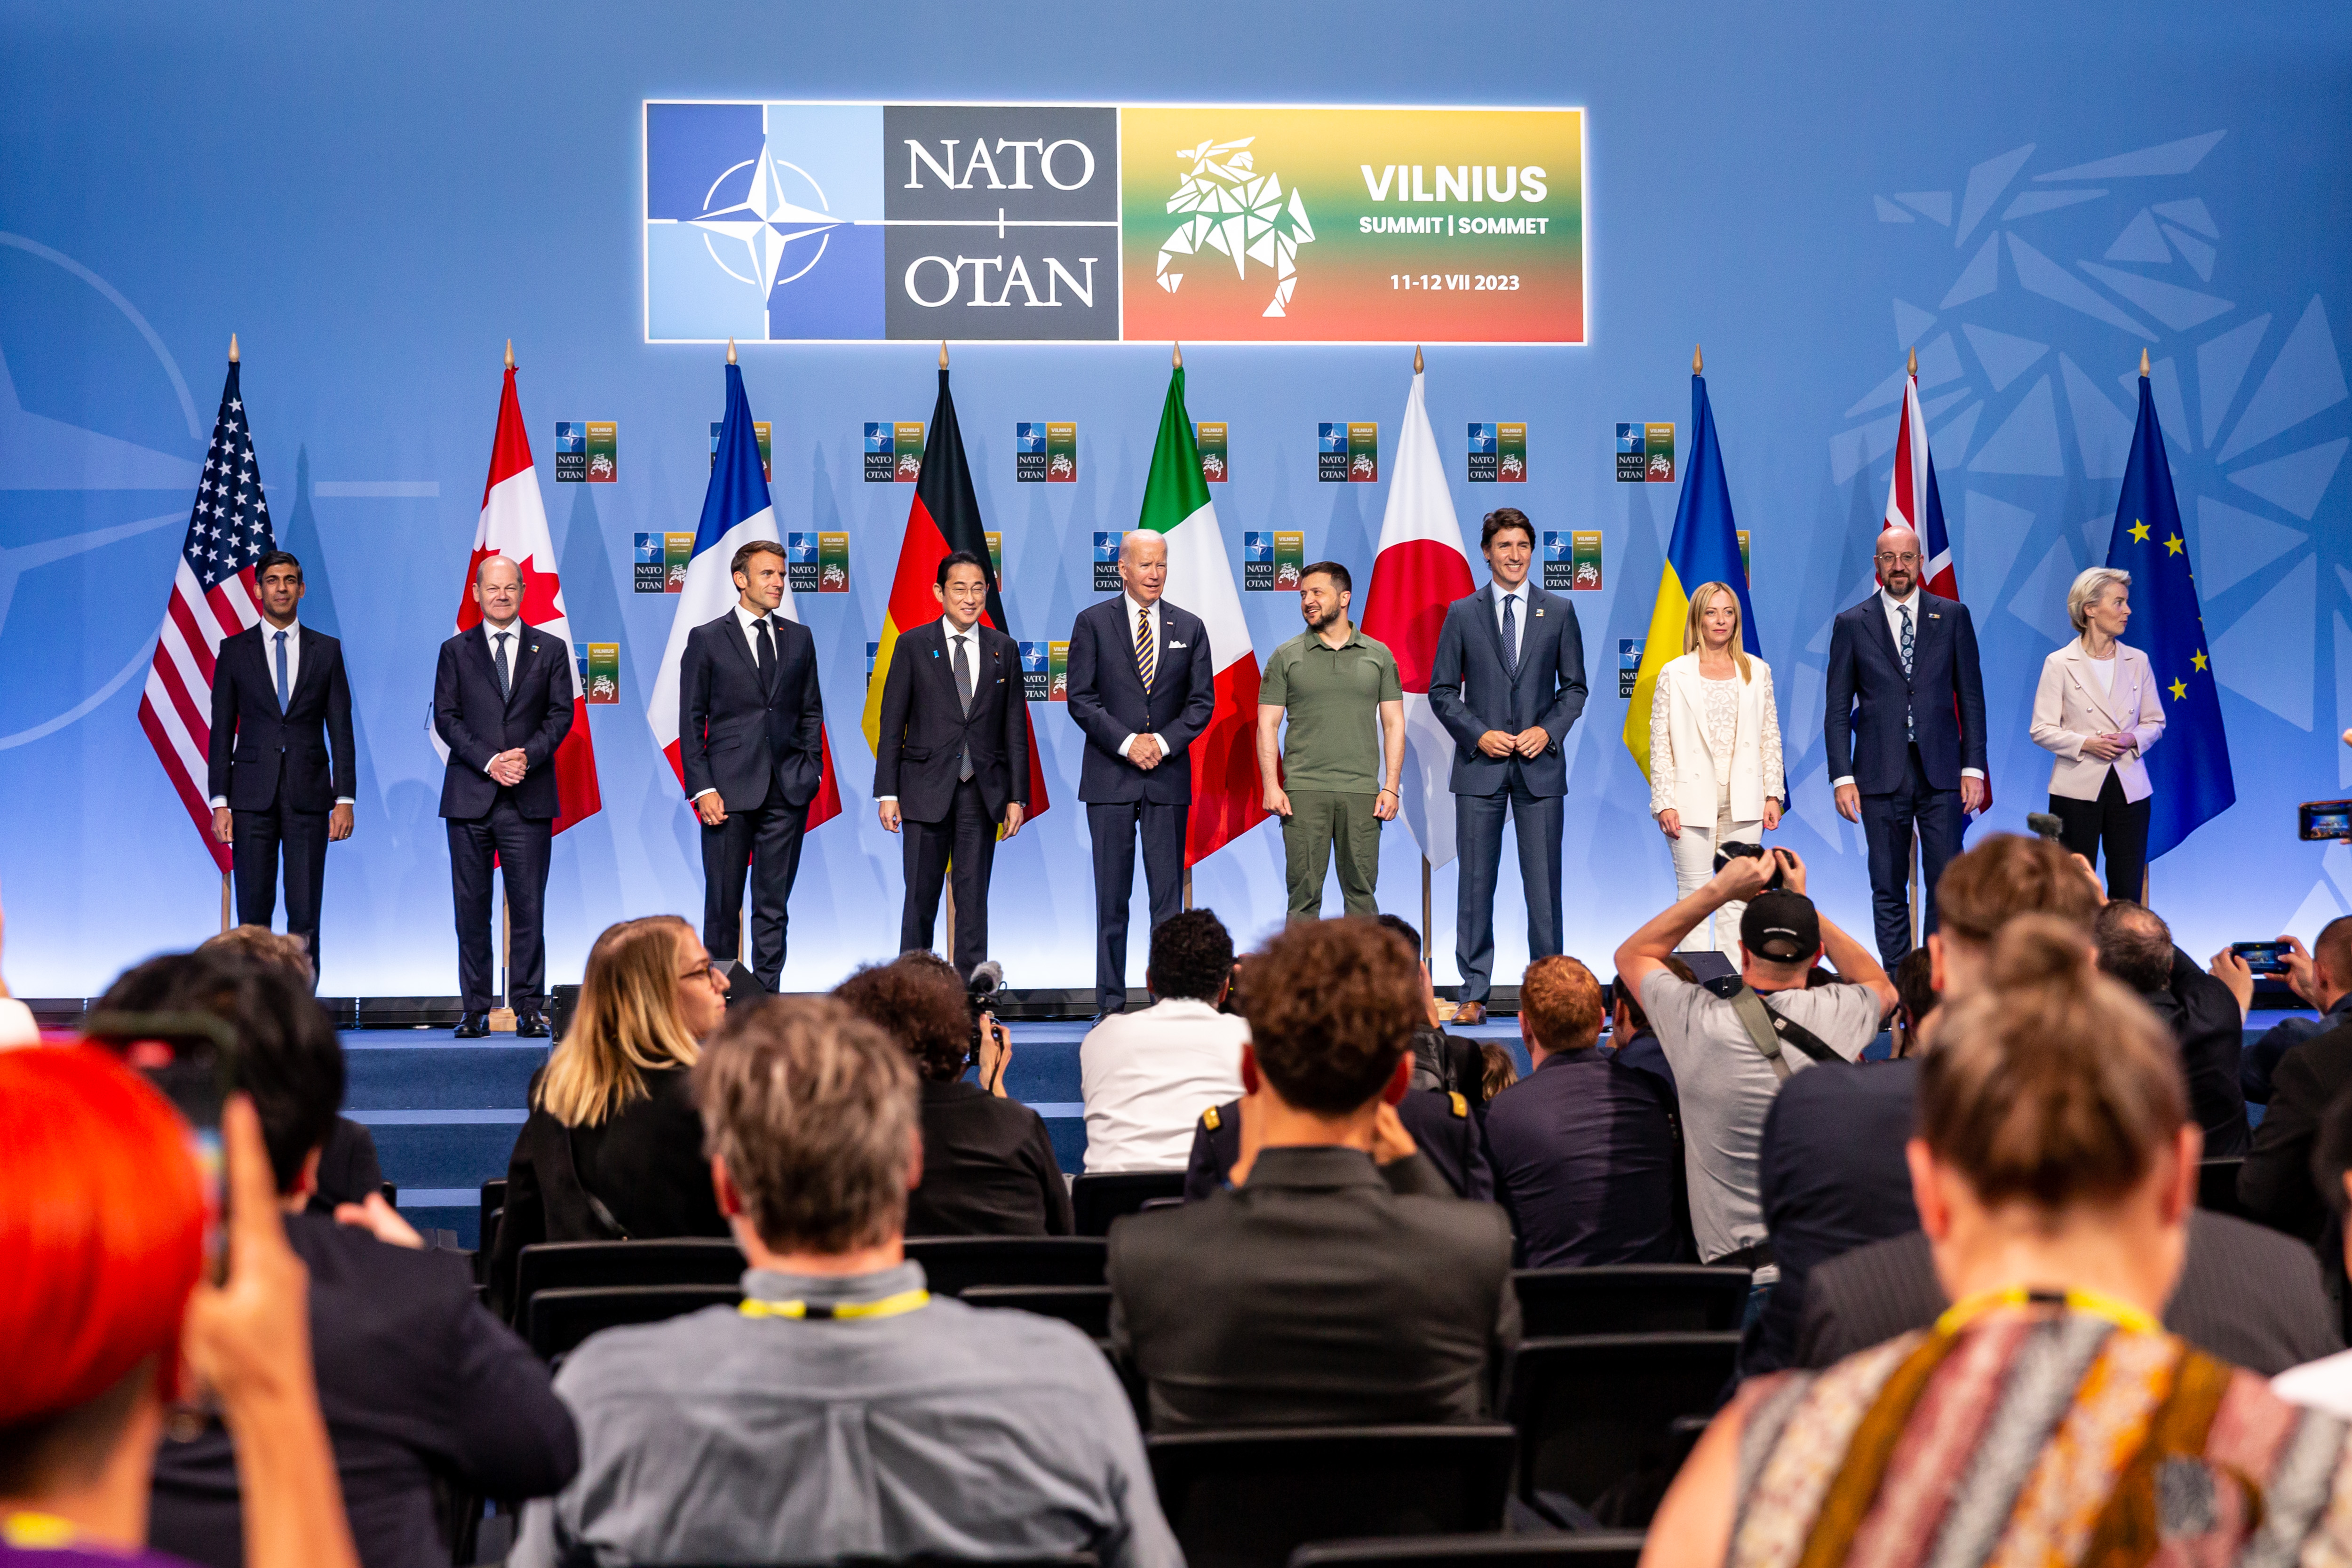 Leaders of the G7 countries with President Zelensky during the high-level NATO summit in Vilnius on 12 July 2023. © Dominika Zarzycka via NurPhoto / Reuters.